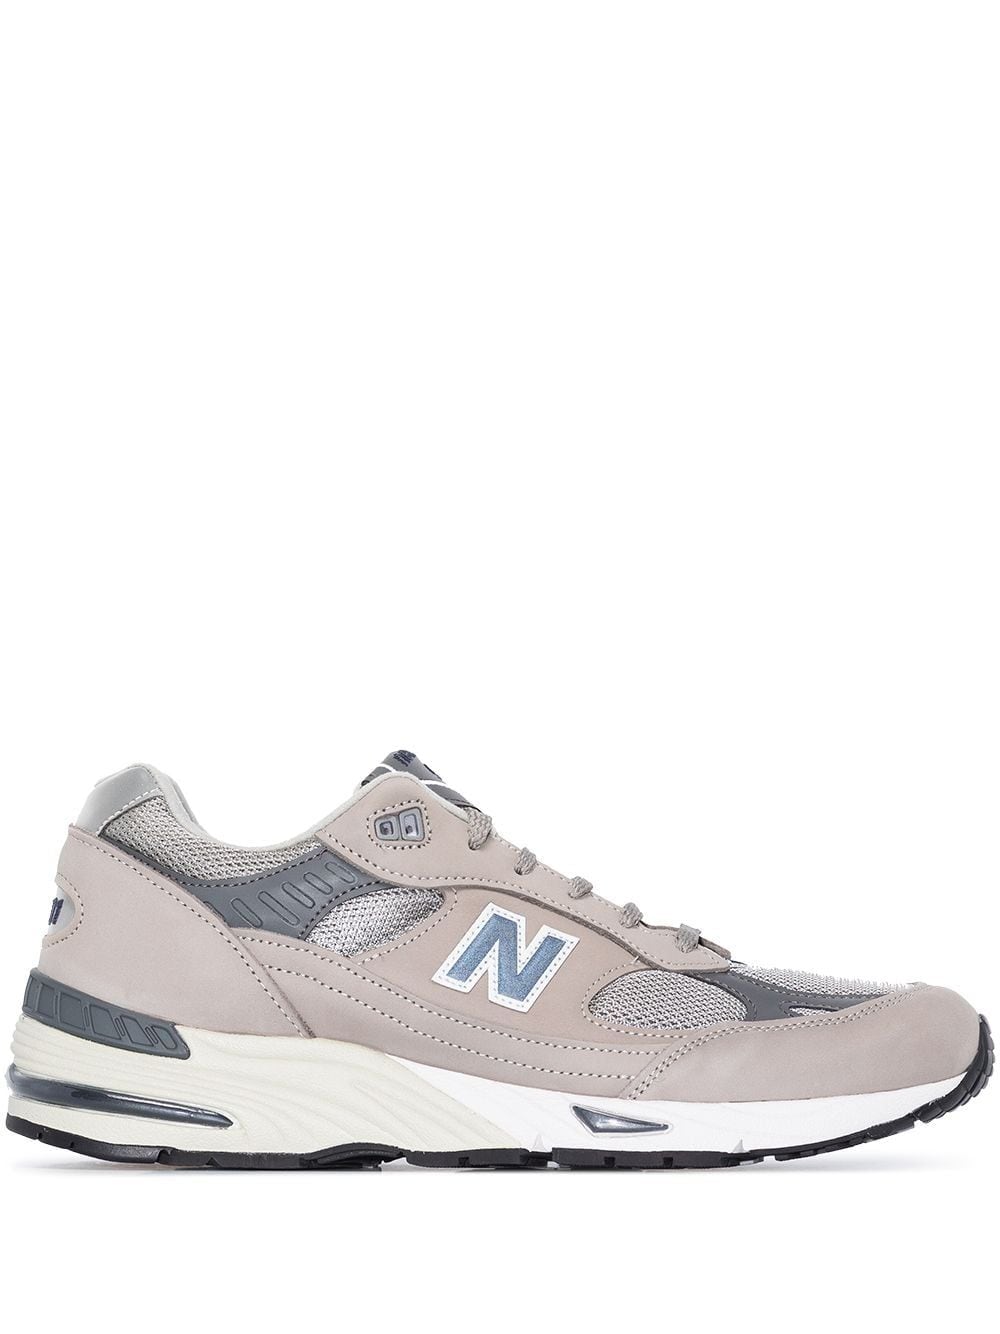 Shop New Balance Made in UK 991 Anniversary sneakers with Express ...